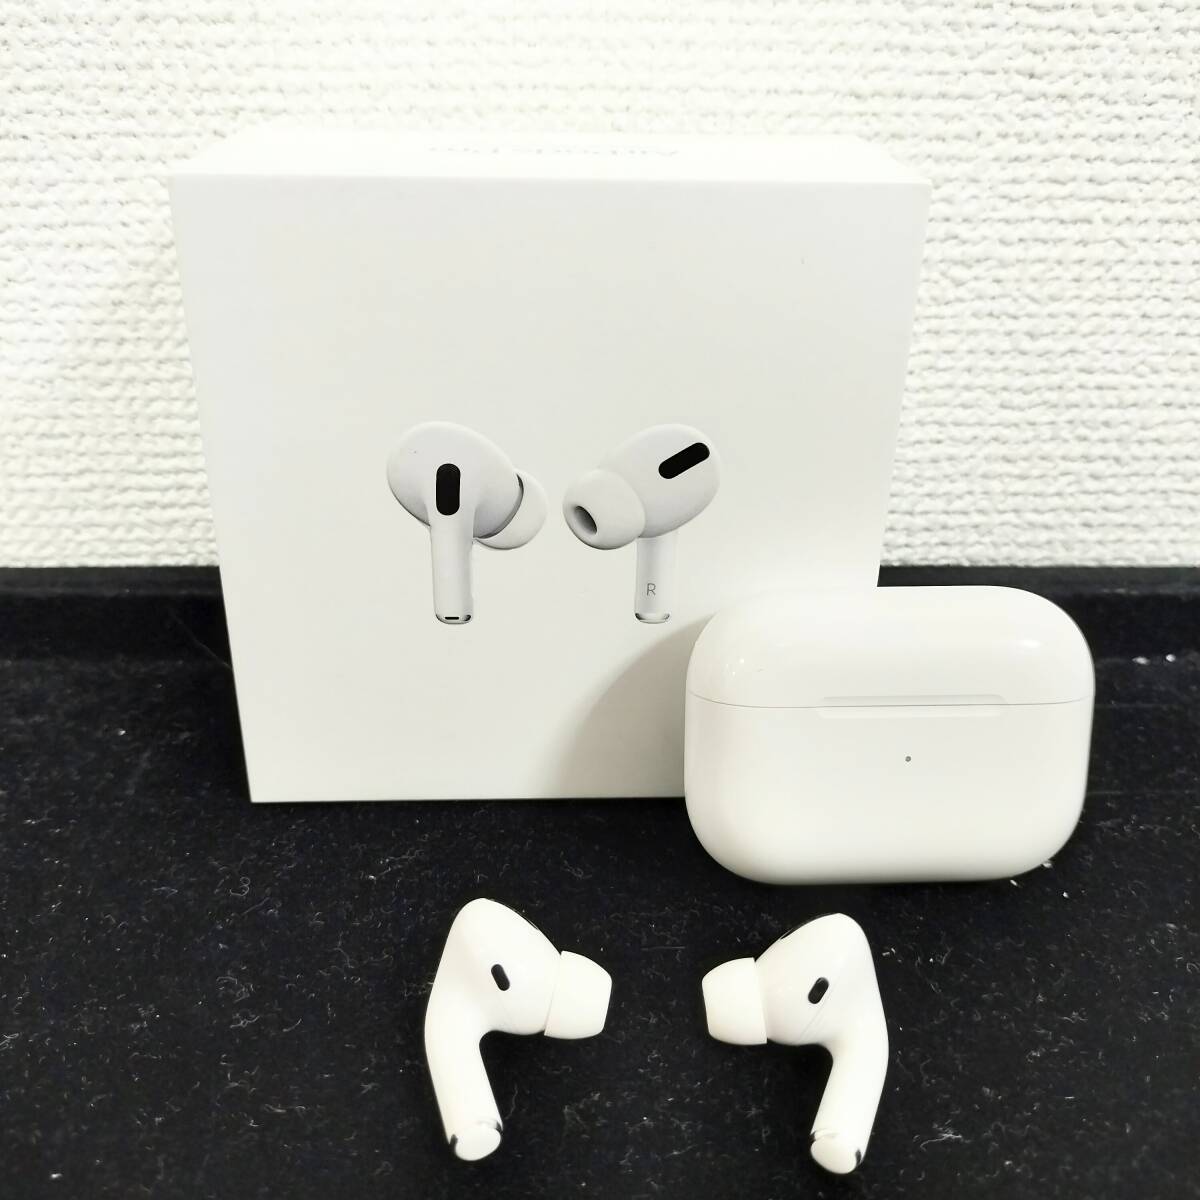 [F-15012]1 jpy ~ Apple AirPods Pro the first generation MWP22JA use impression equipped charger lack of electrification verification settled Apple wireless earphone 